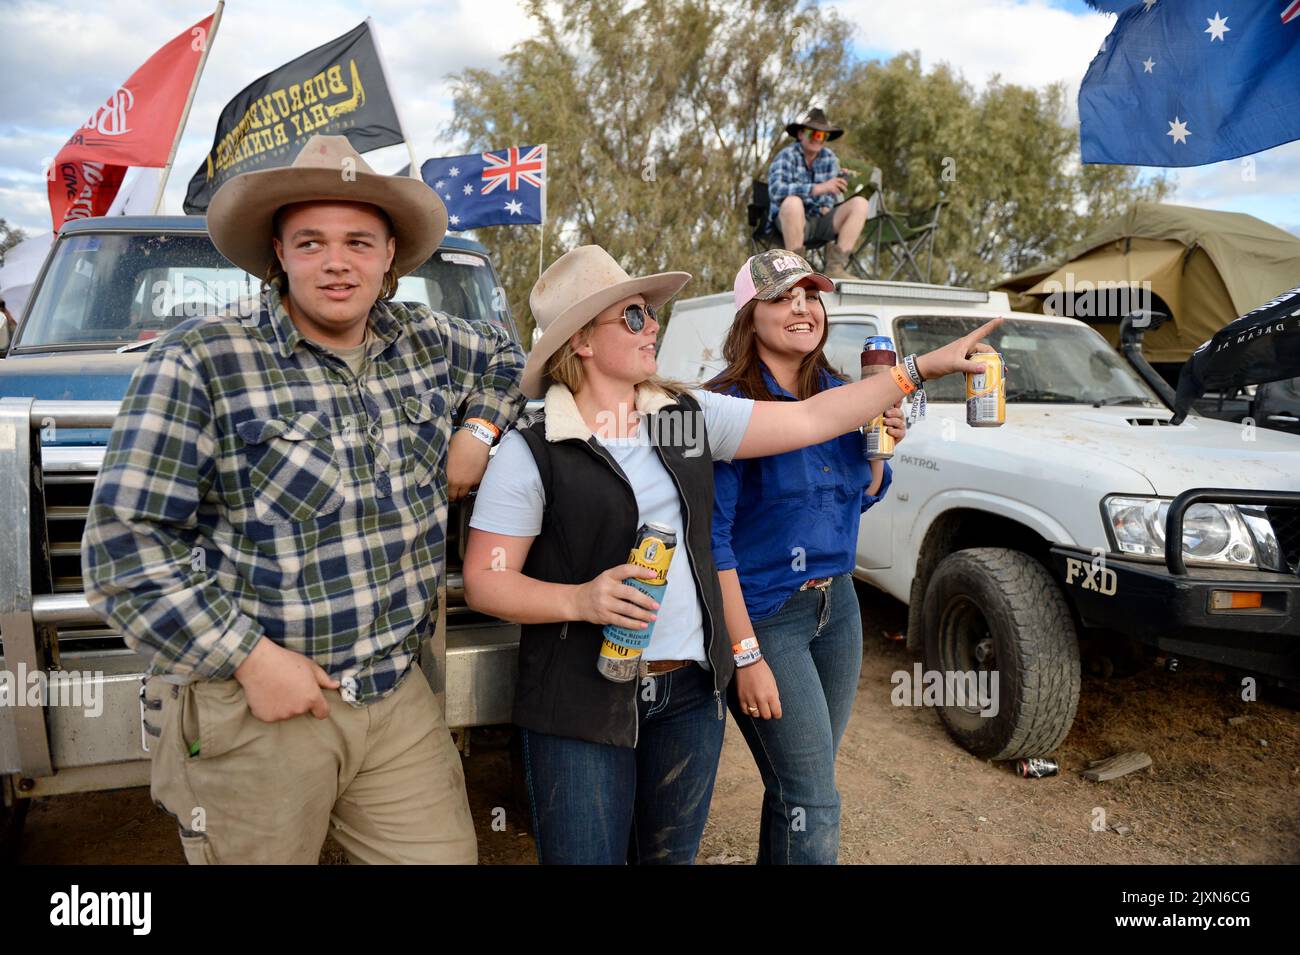 Participants take part in the annual Ute Muster celebration in the small NSW town of Deniliquin, on Friday, September 28, 2018. The Deniliquin Ute Muster celebrates all things Australian and the icon of the Ute. (AAP Image/Perry Duffin) Stock Photo